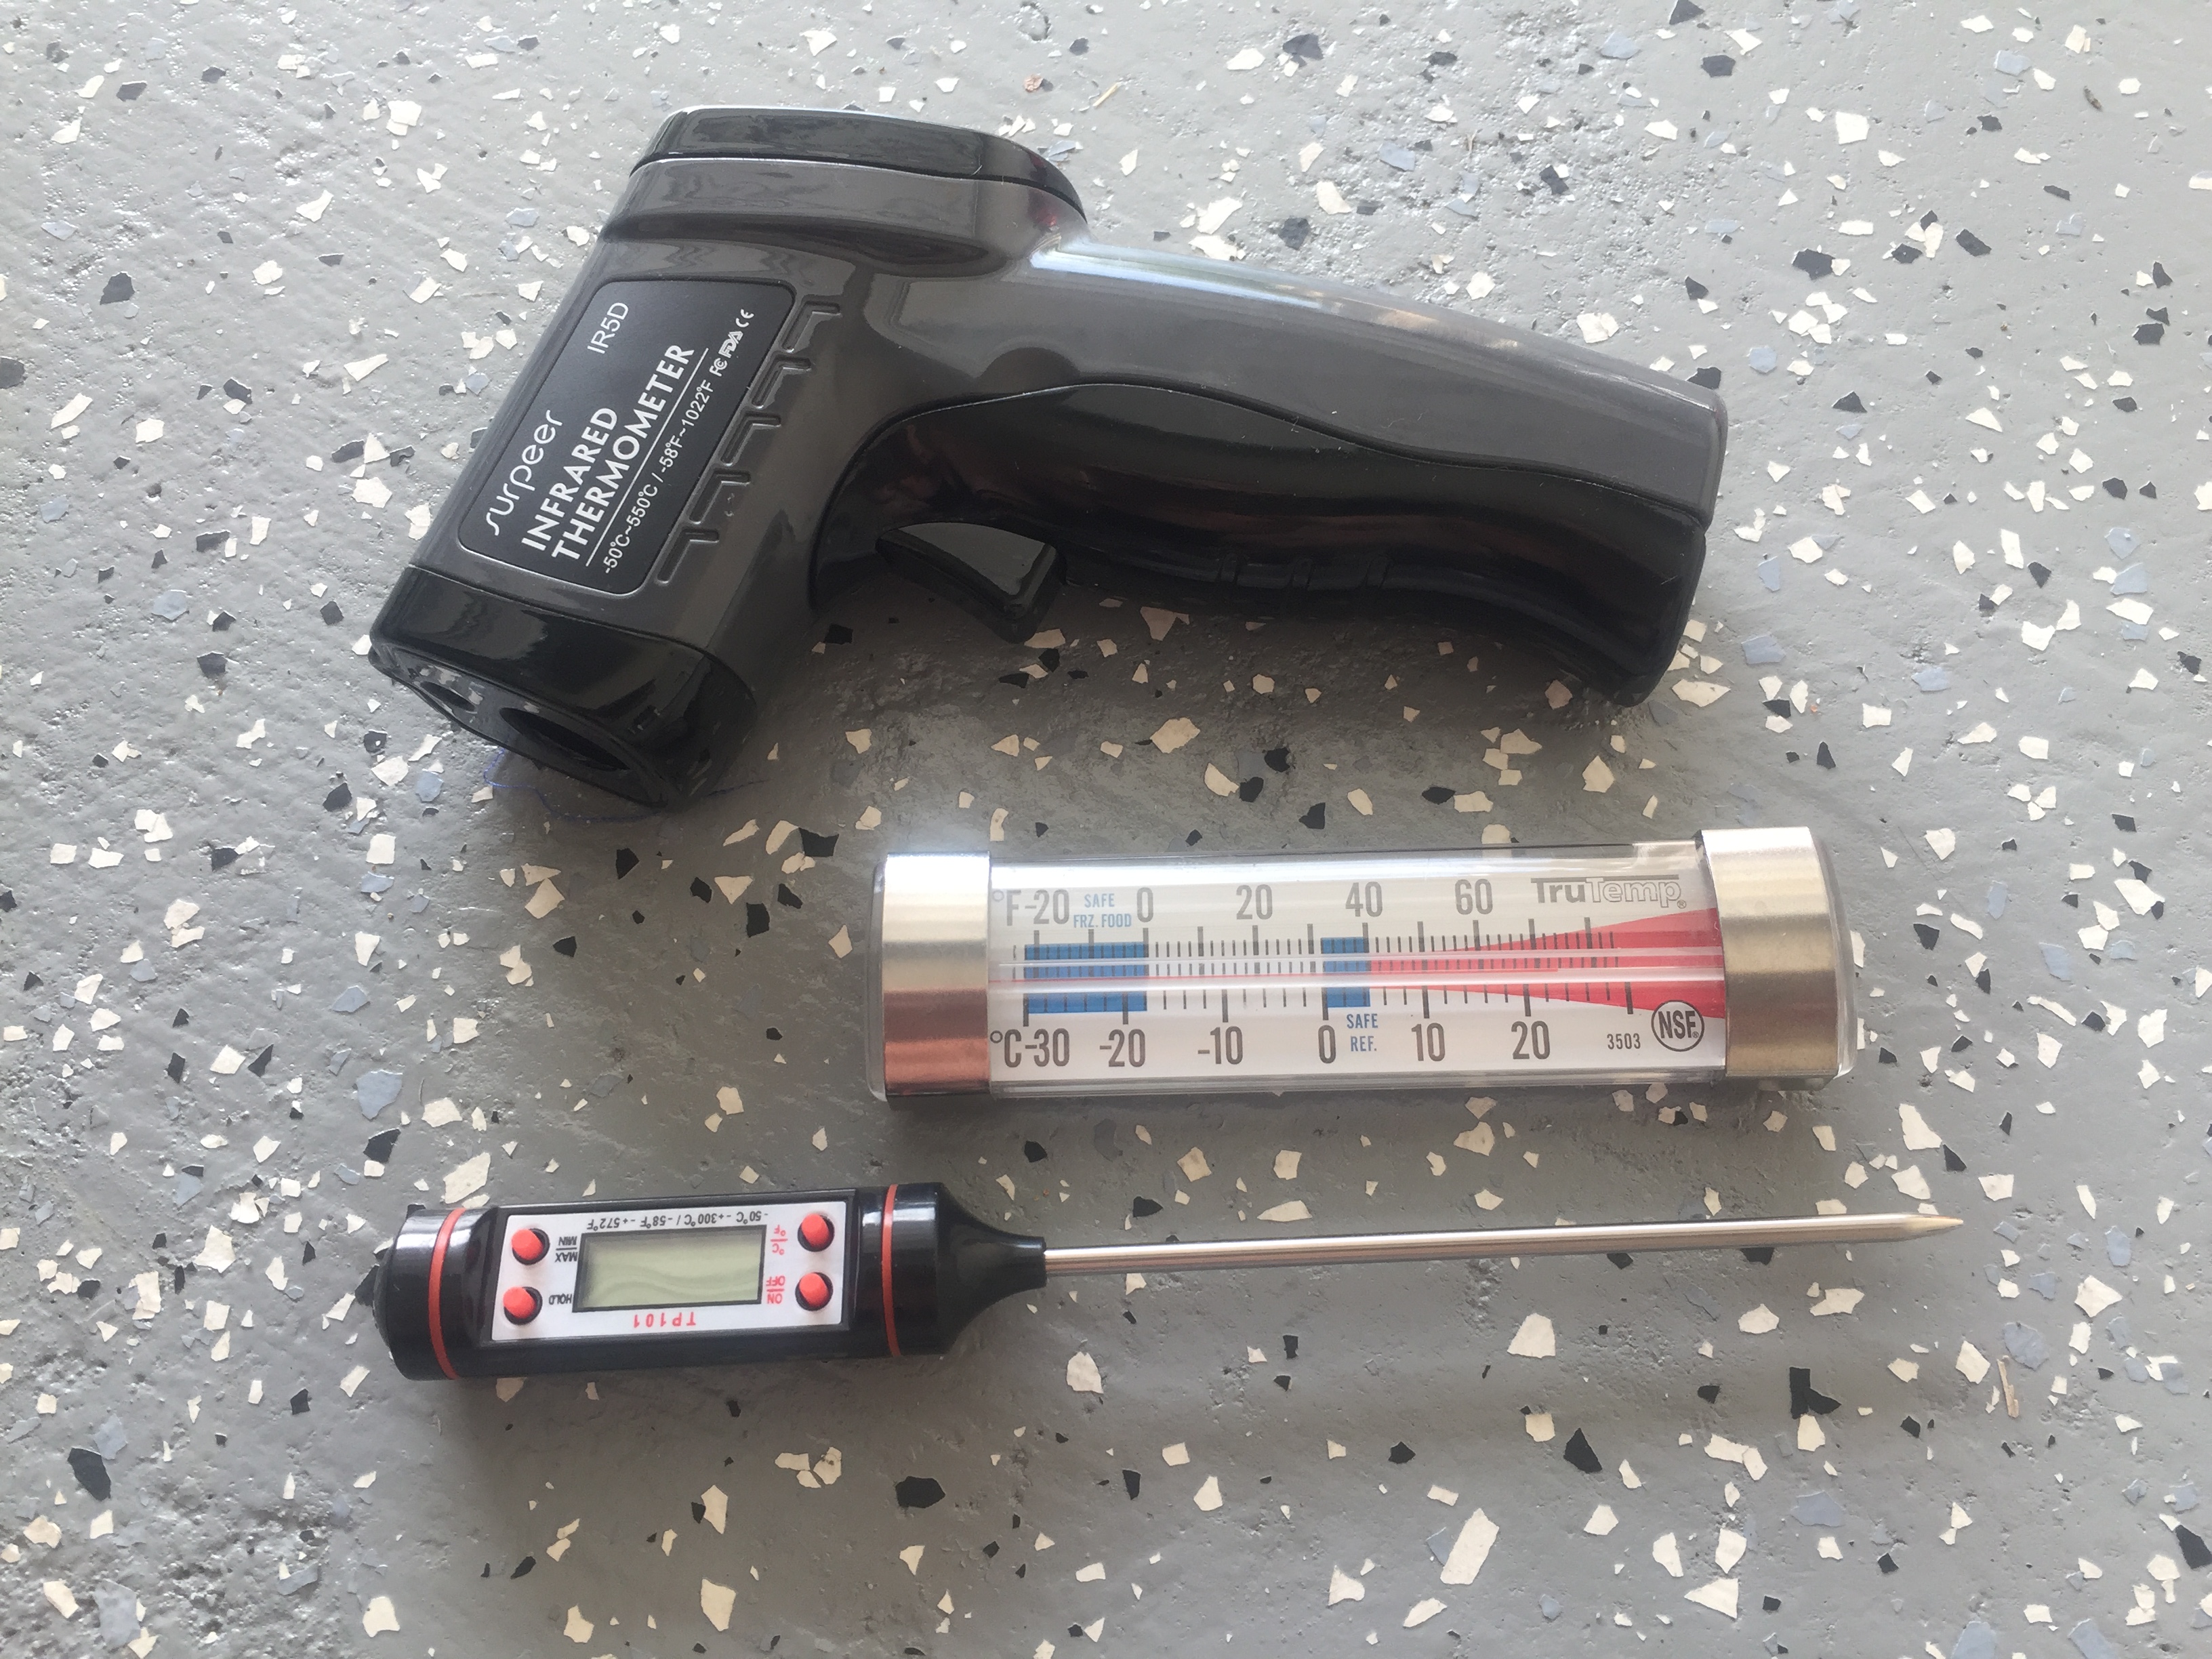 Thermometers used in inspecting motorhomes and RVs